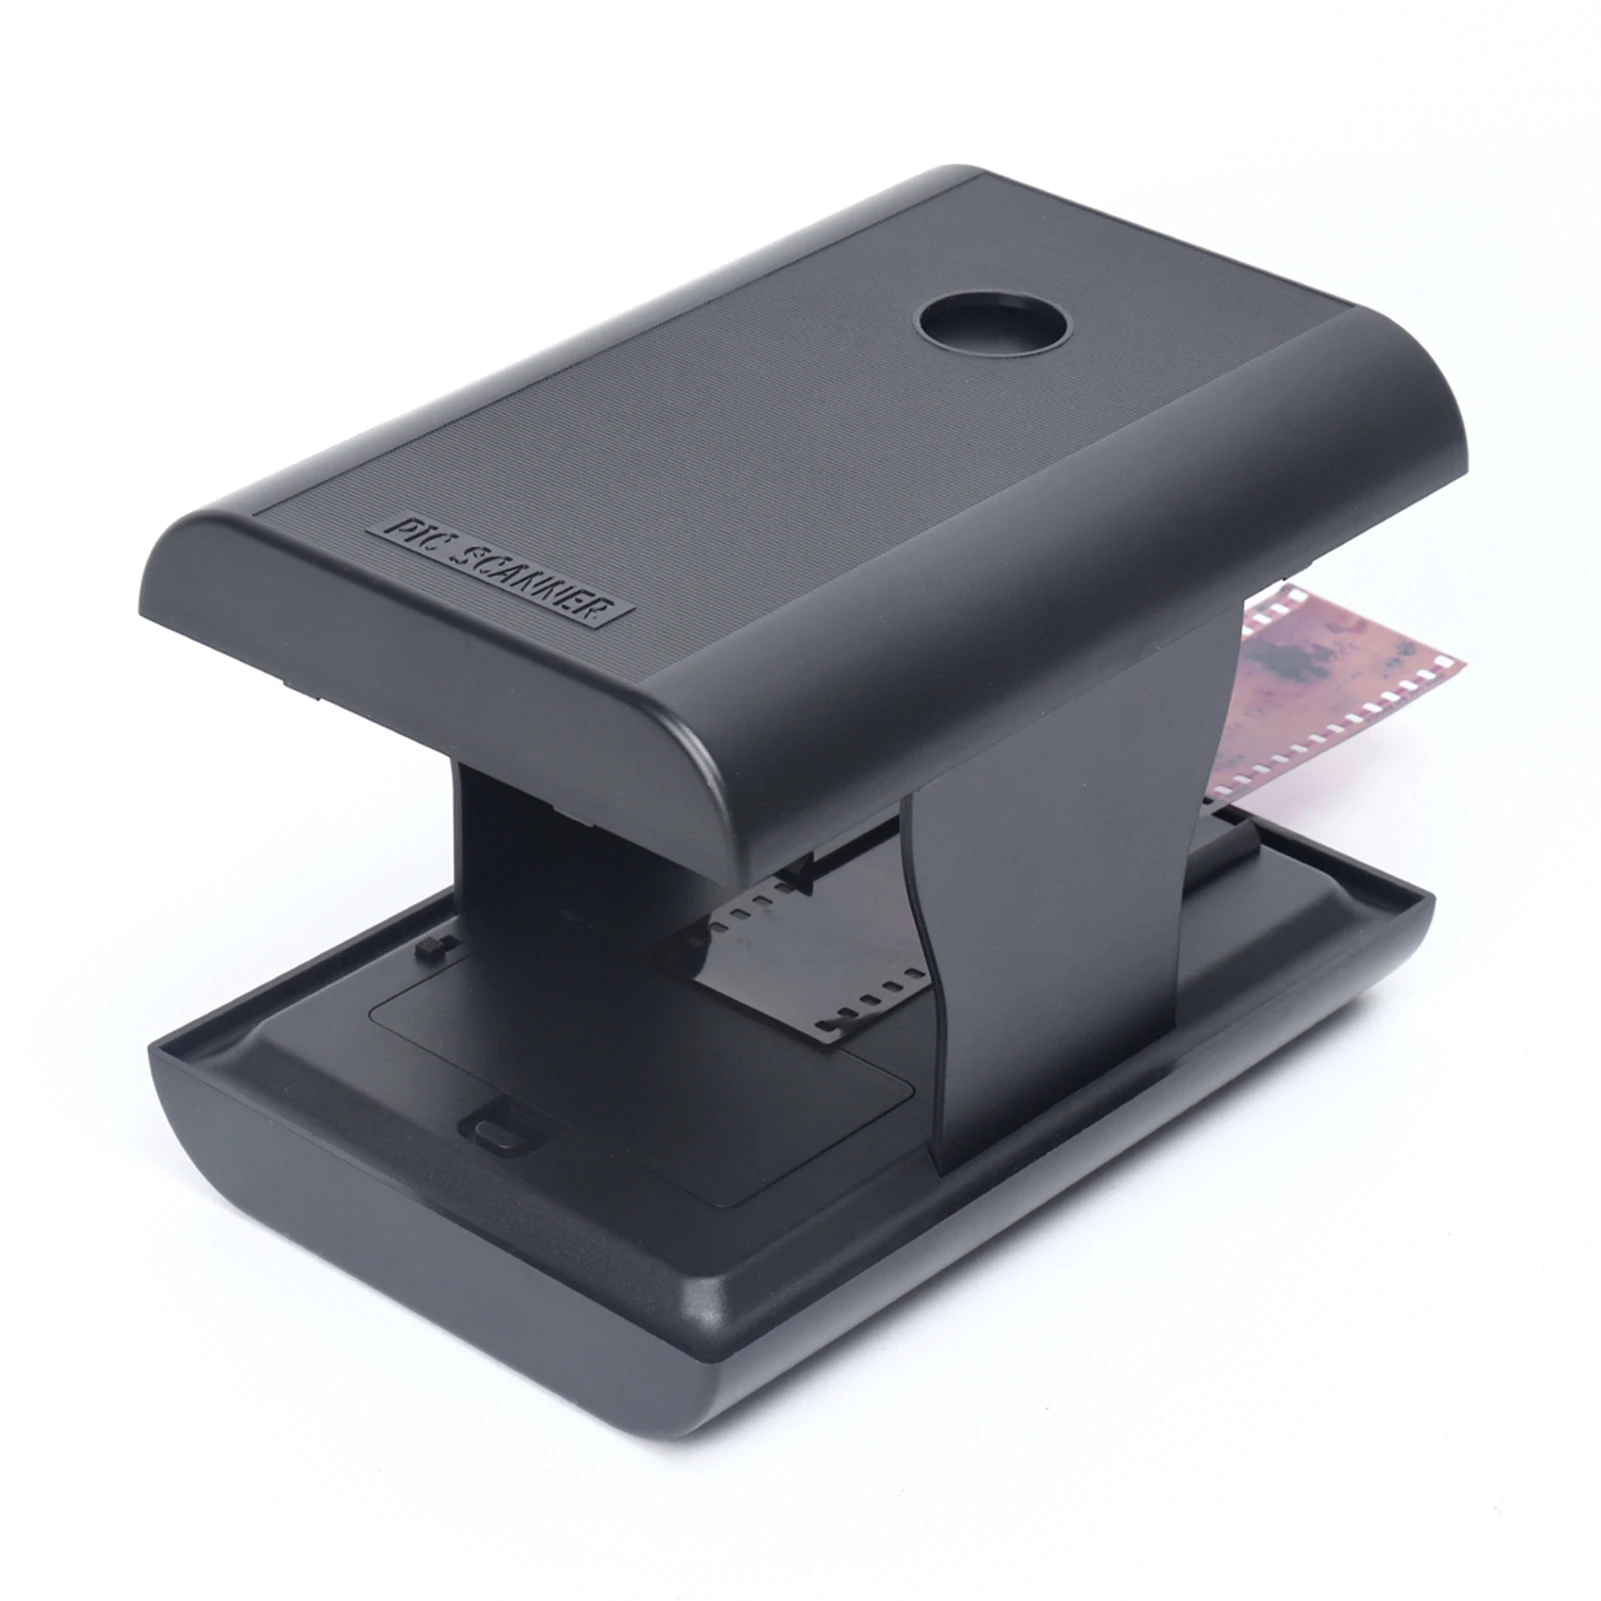 35/135mm Negatives and Slides Mobile Film Scanner Folding Scanner with Free APP Smartphone Camera can Play and Scan Old Films business card scanner